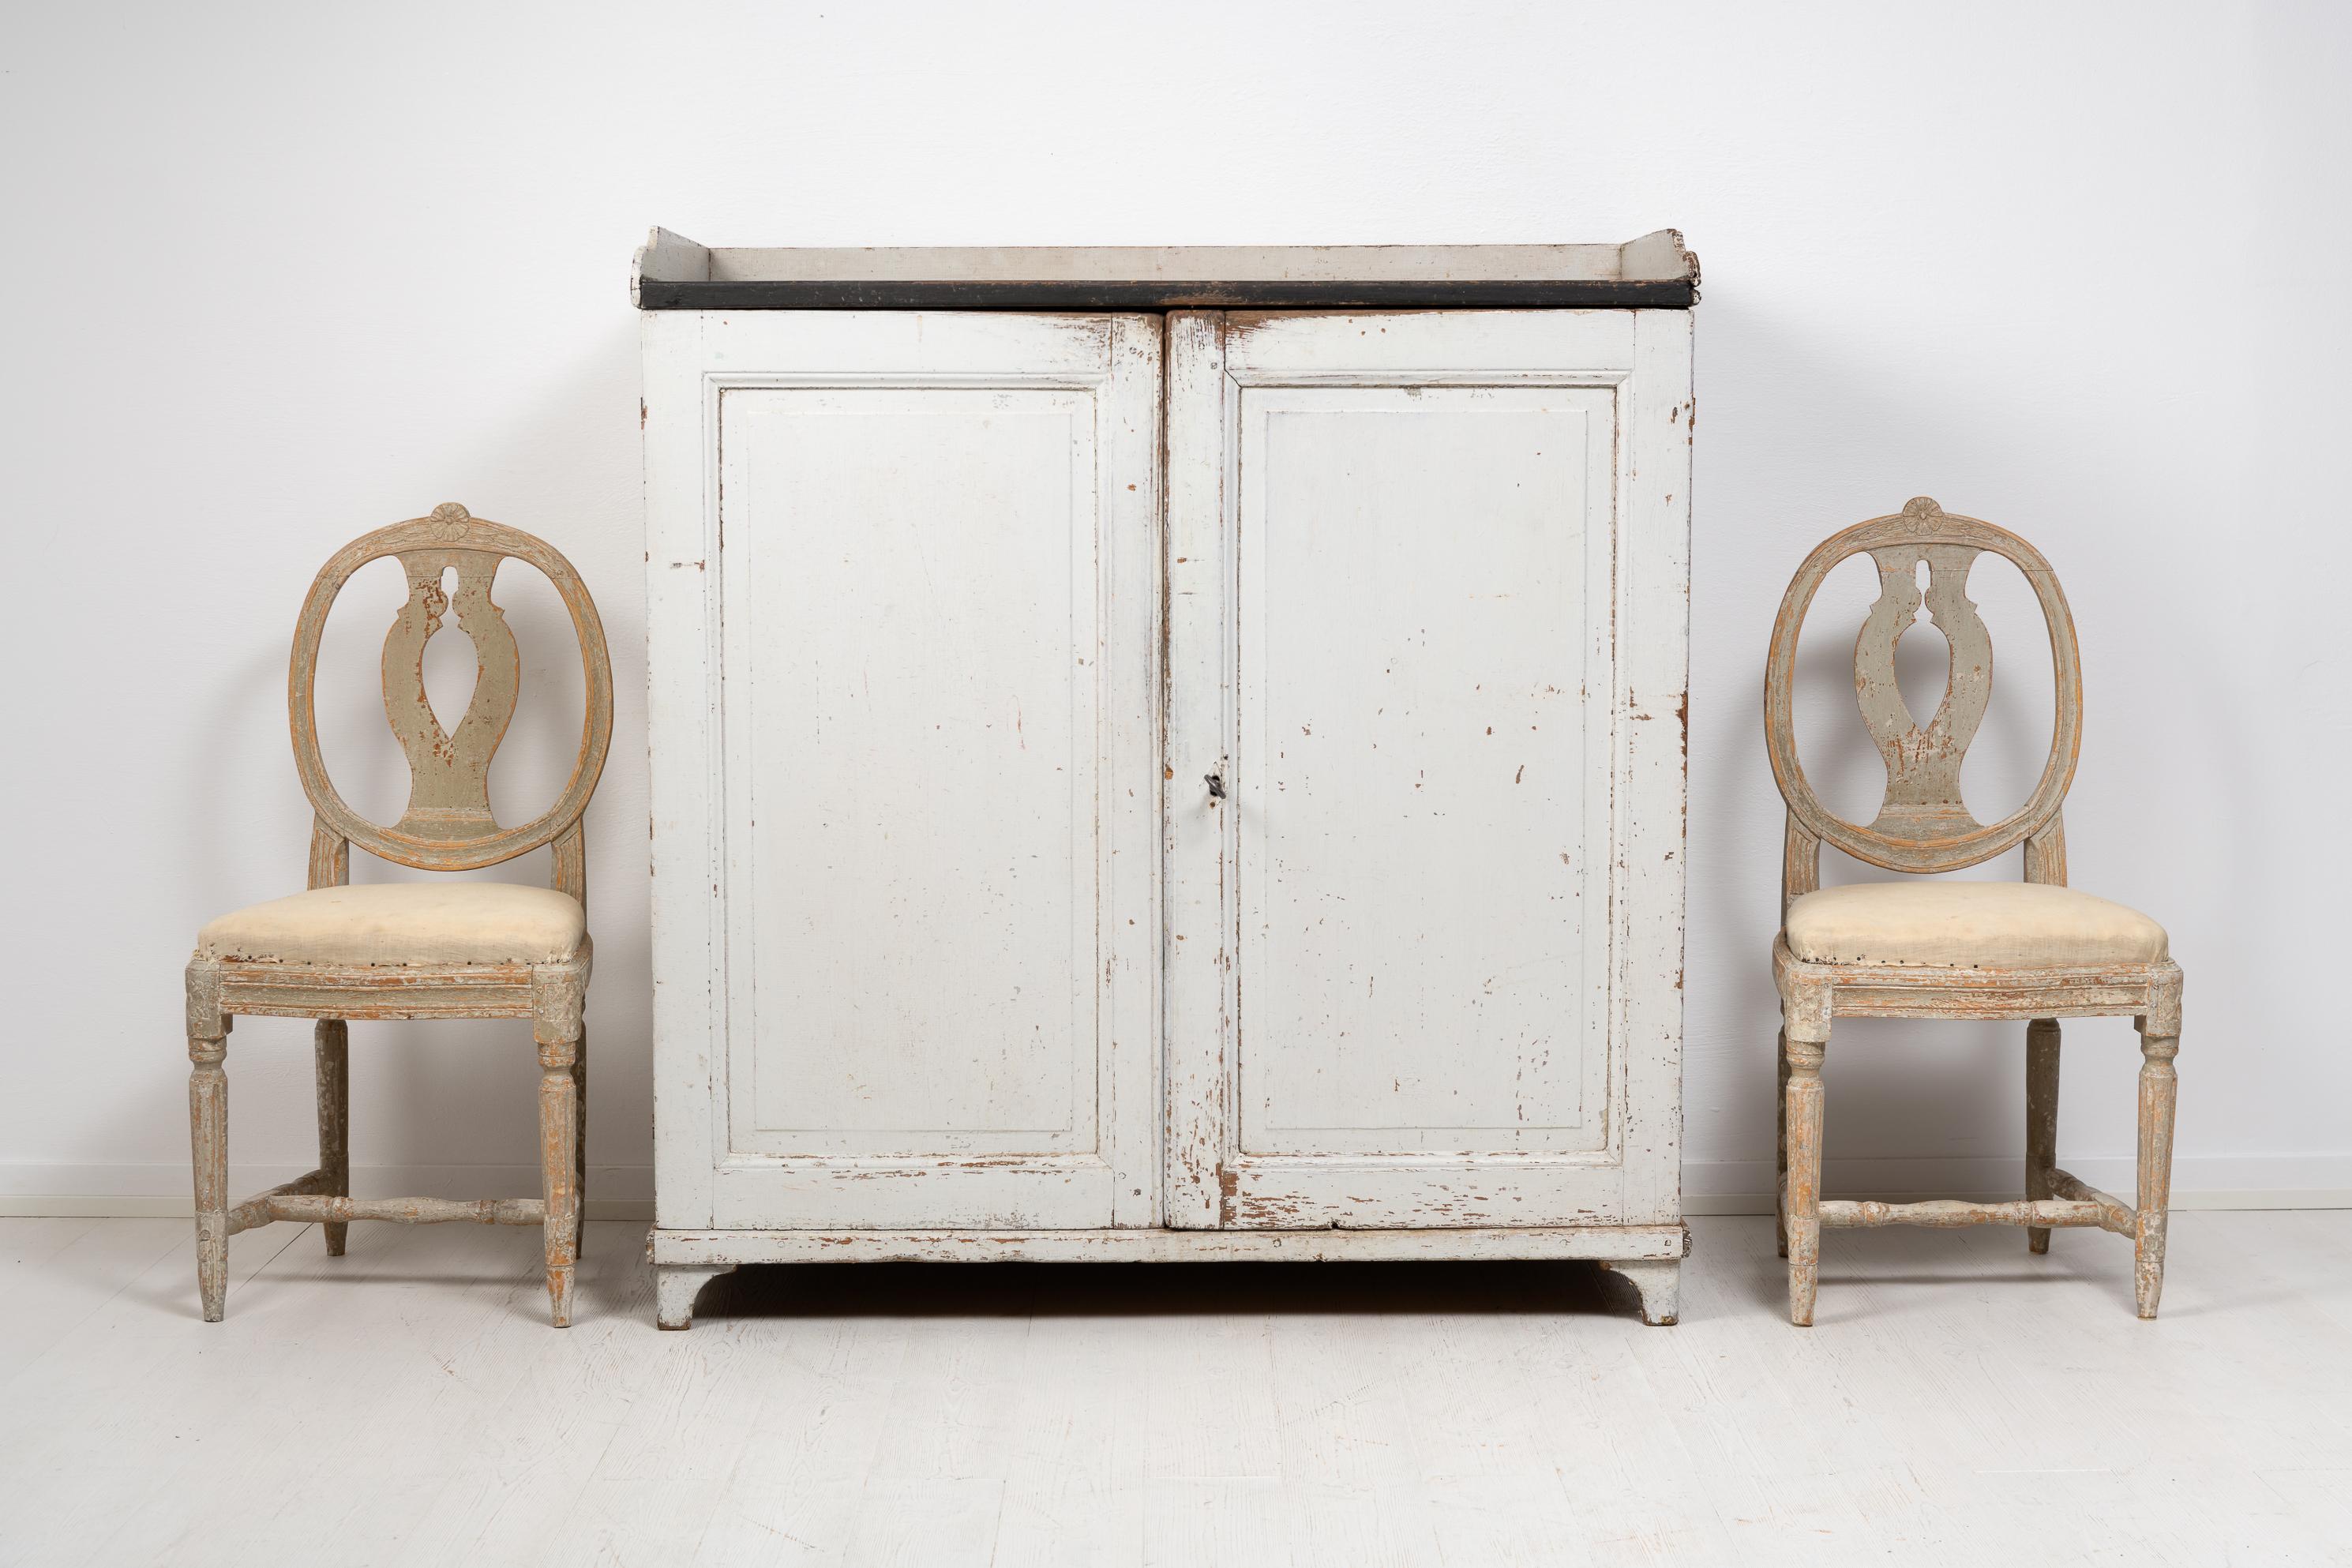 Swedish country furniture sideboard in folk art from northern Sweden. The sideboard is from the early 1800s, likely the years around 1810 to 1820. It’s painted pine and in the untouched original condition with paint from the mid 1800s. There are